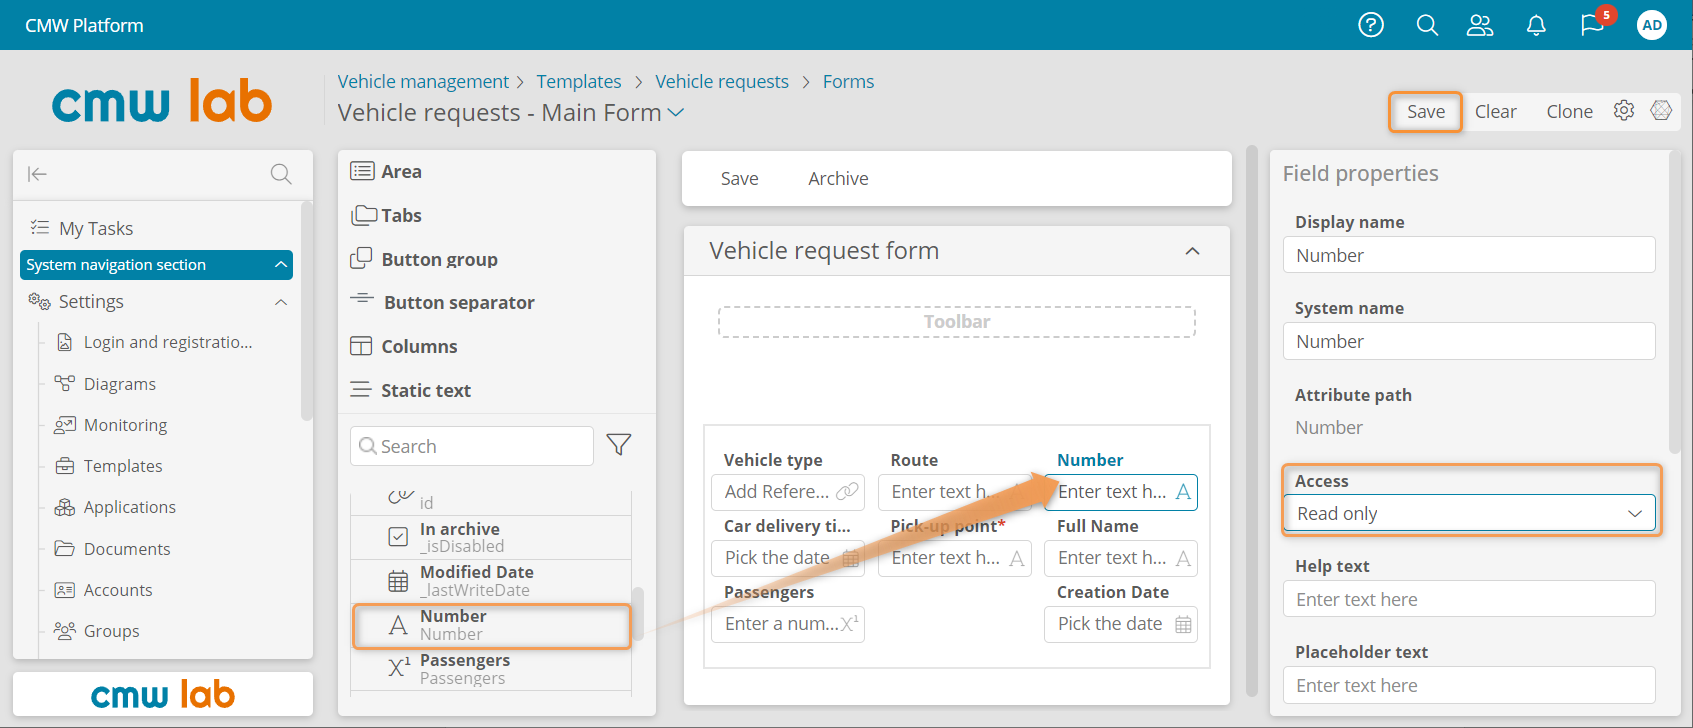 Adding the request number to the vehicle request form